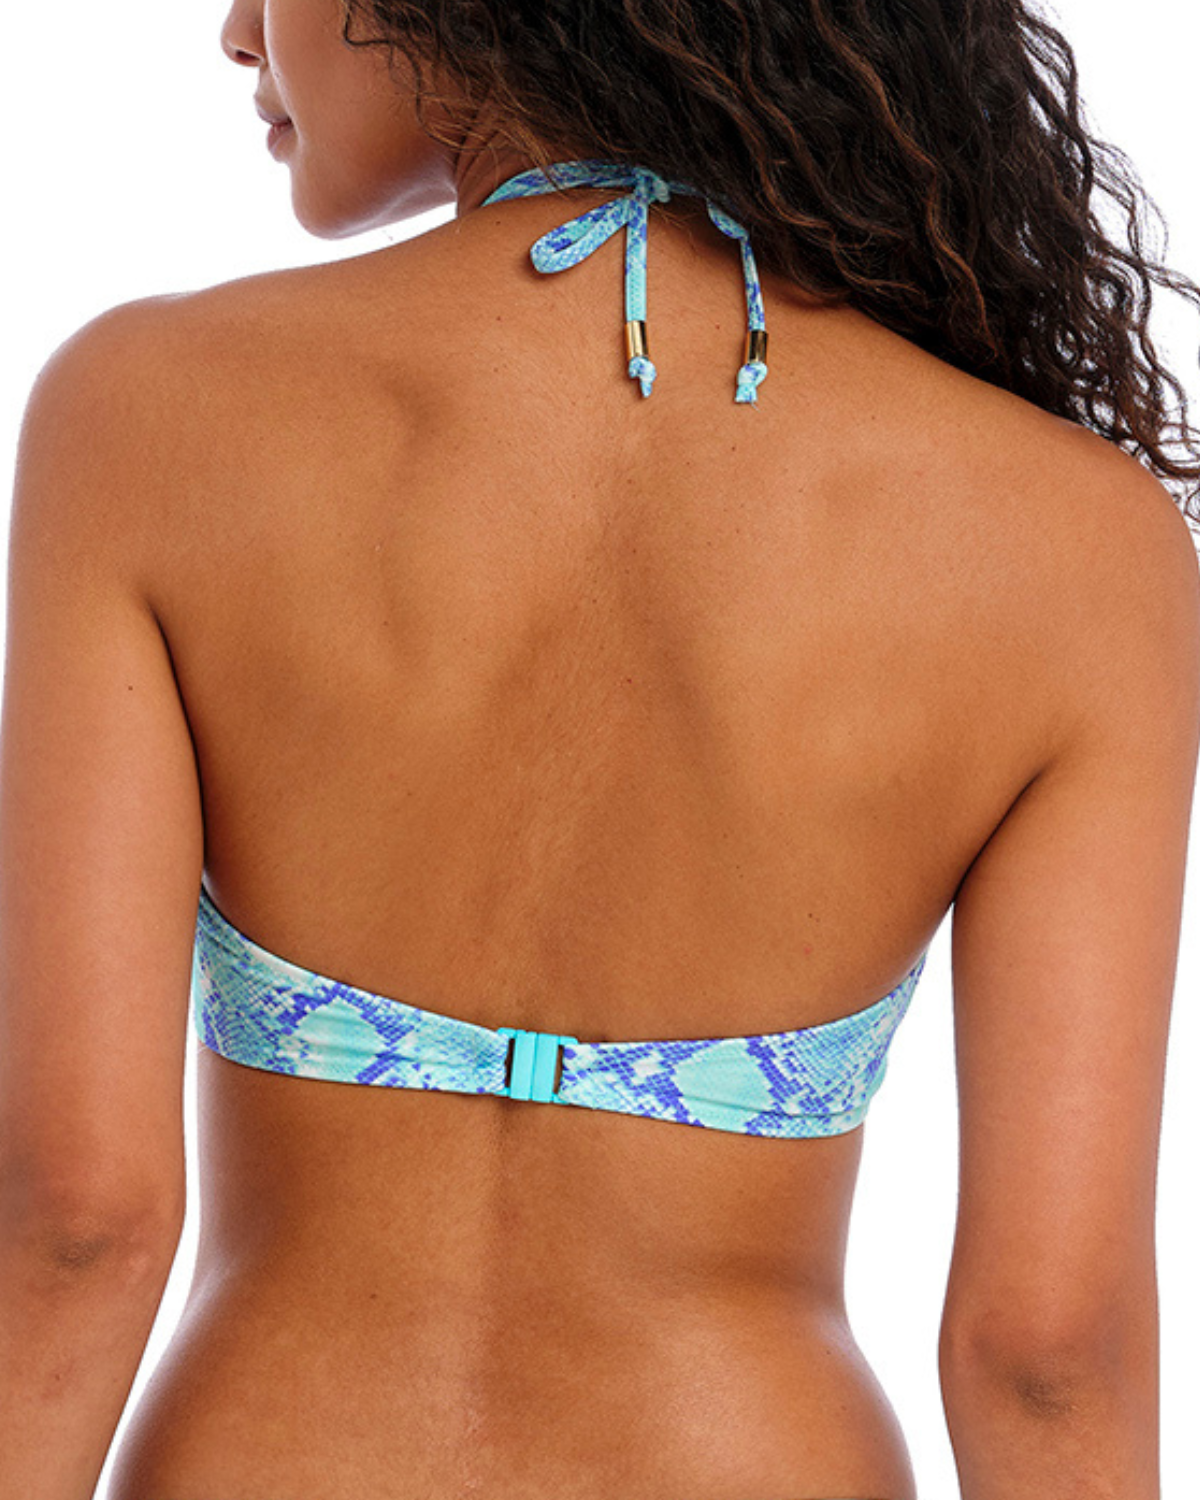 Model wearing a halter bikini top in a turquoise and blue snake print